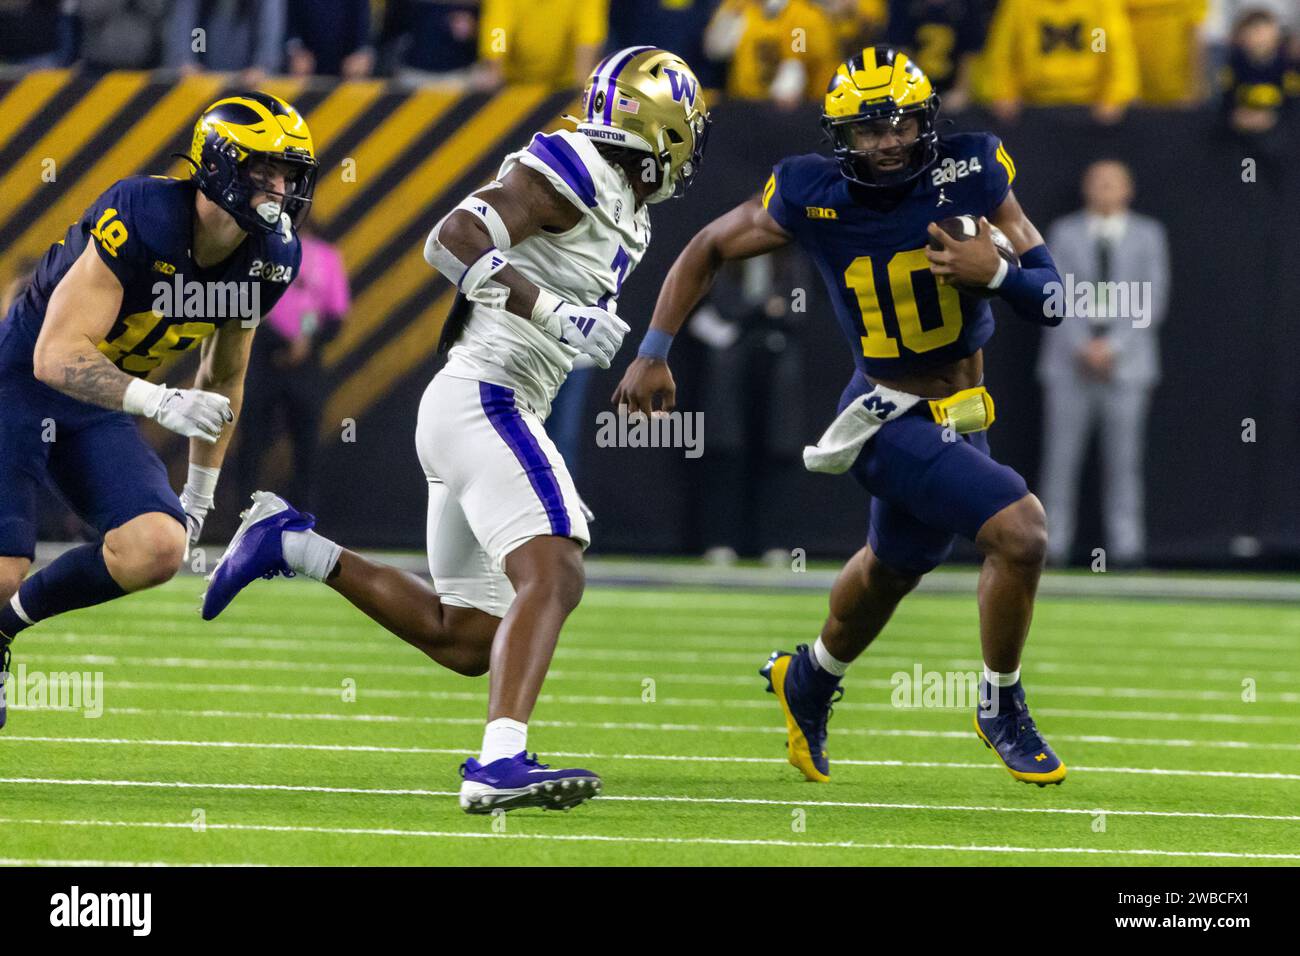 Michigan Wolverines quarterback Alex Orji (10) carries the ball as Washington Huskies cornerback Dominique Hampton (7) closes in for the tackle during Stock Photo